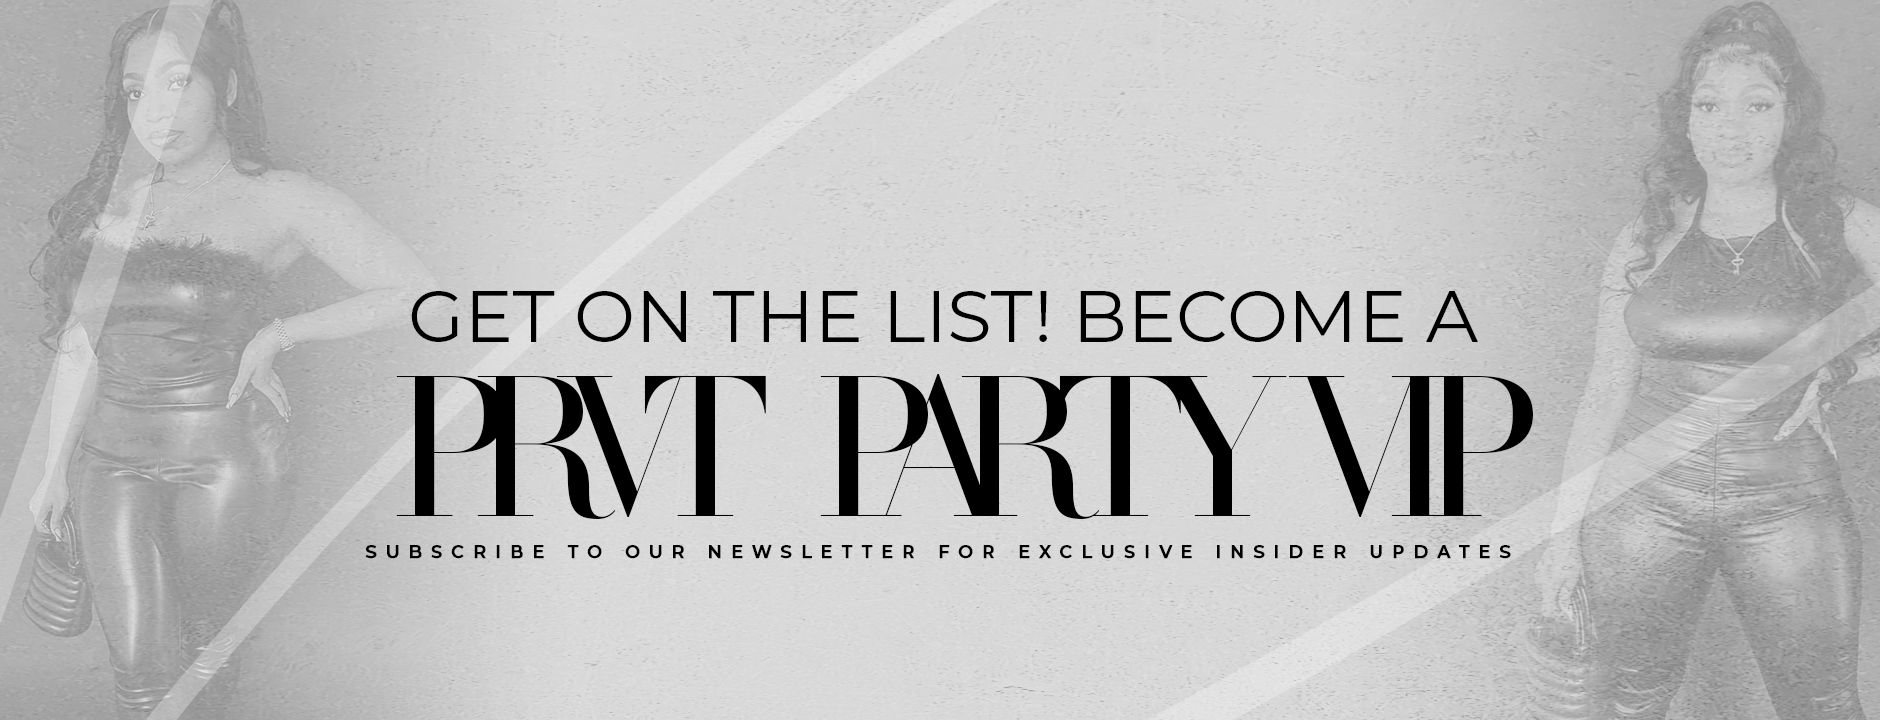 PRVT Party Luxe